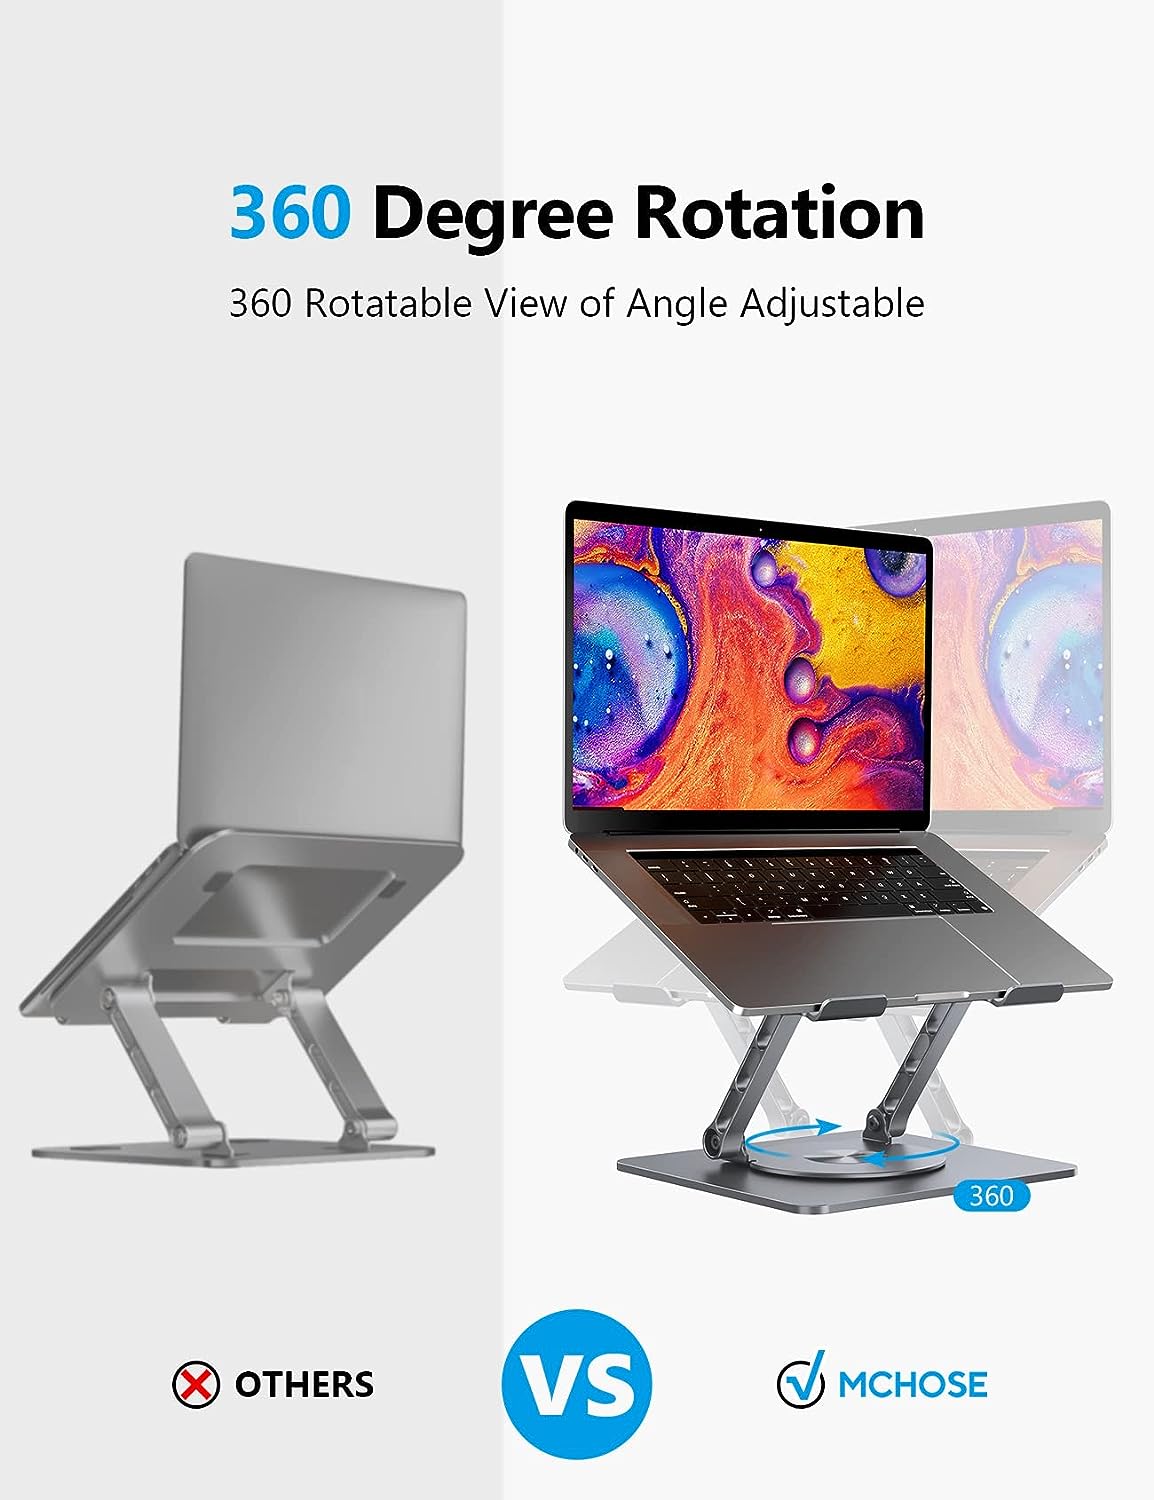 Laptop Stand, Adjustable Laptop Holder with 360° Rotating Base, Foldable Laptop Riser Compatible for MacBook Pro/Air, Surface Laptop up to 15.6 inches, Space Grey